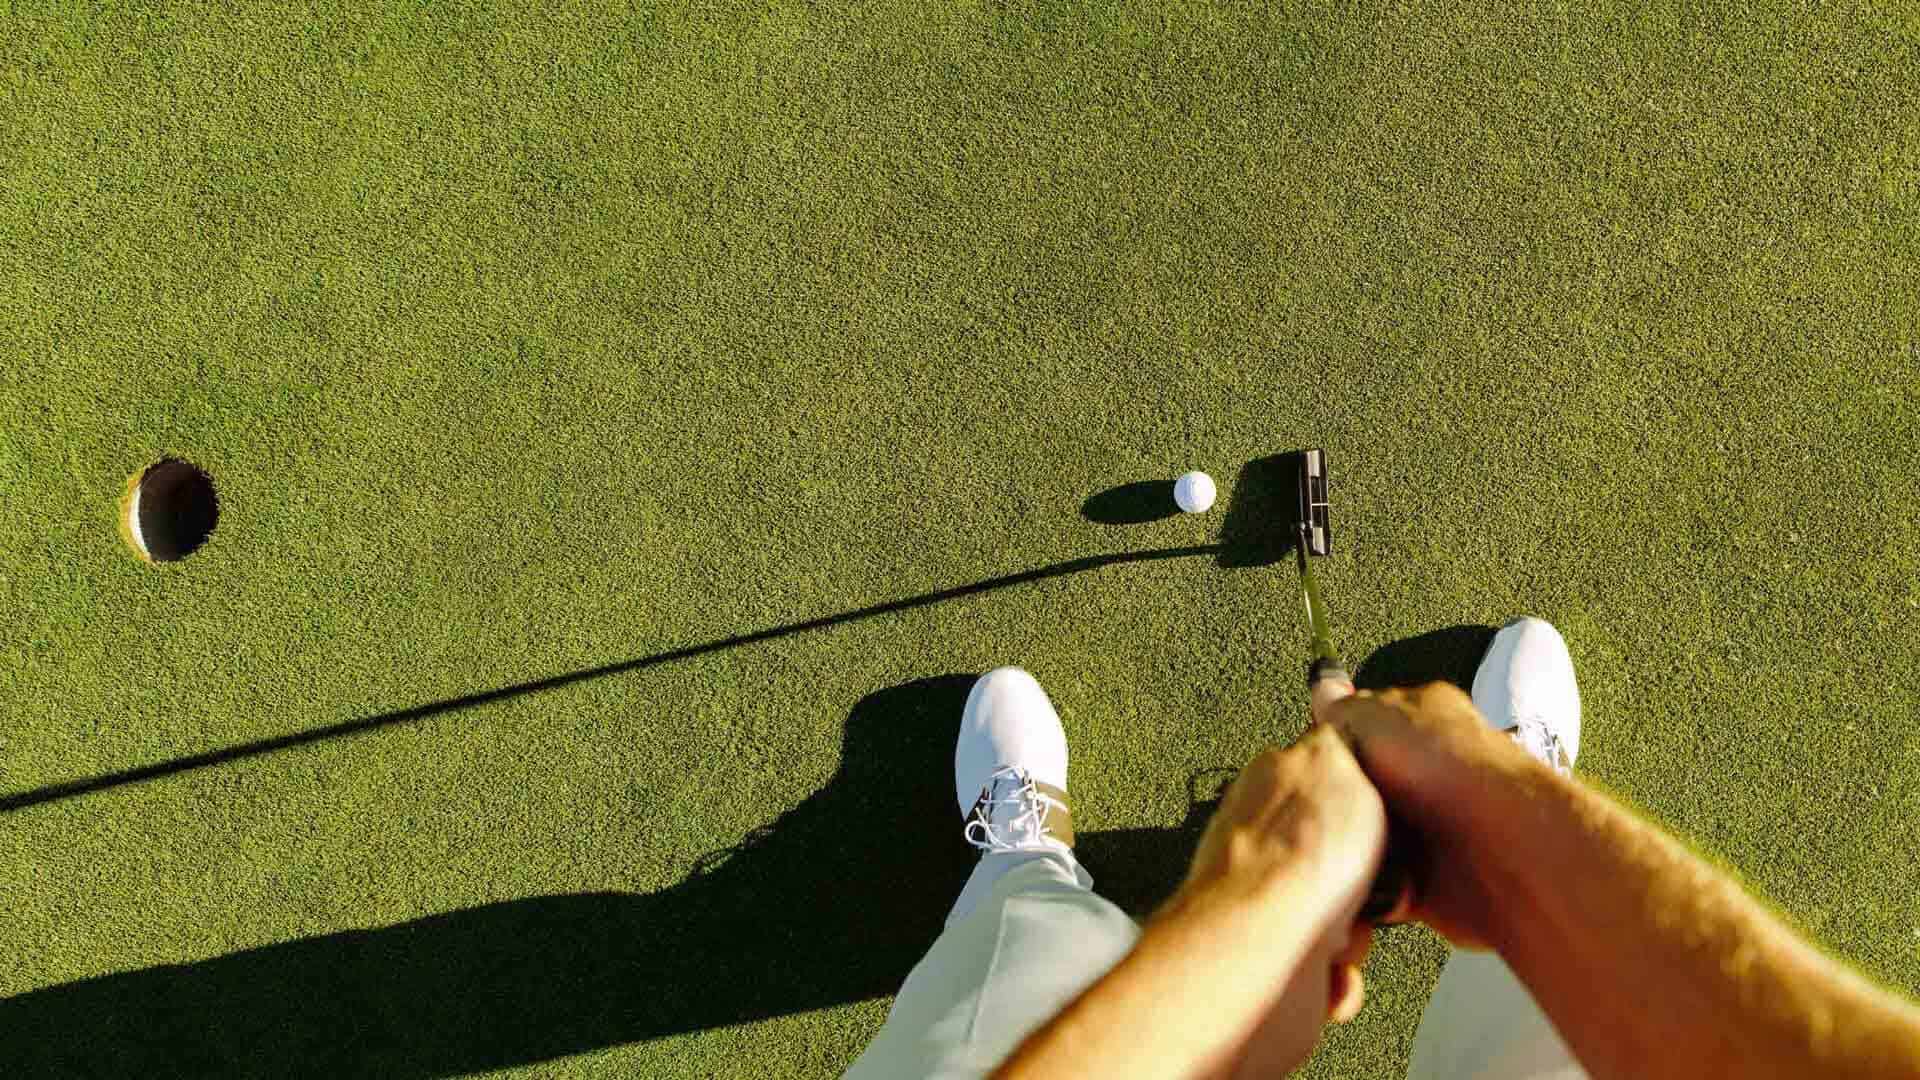 Golf is a Mental Game: Don't Overthink It